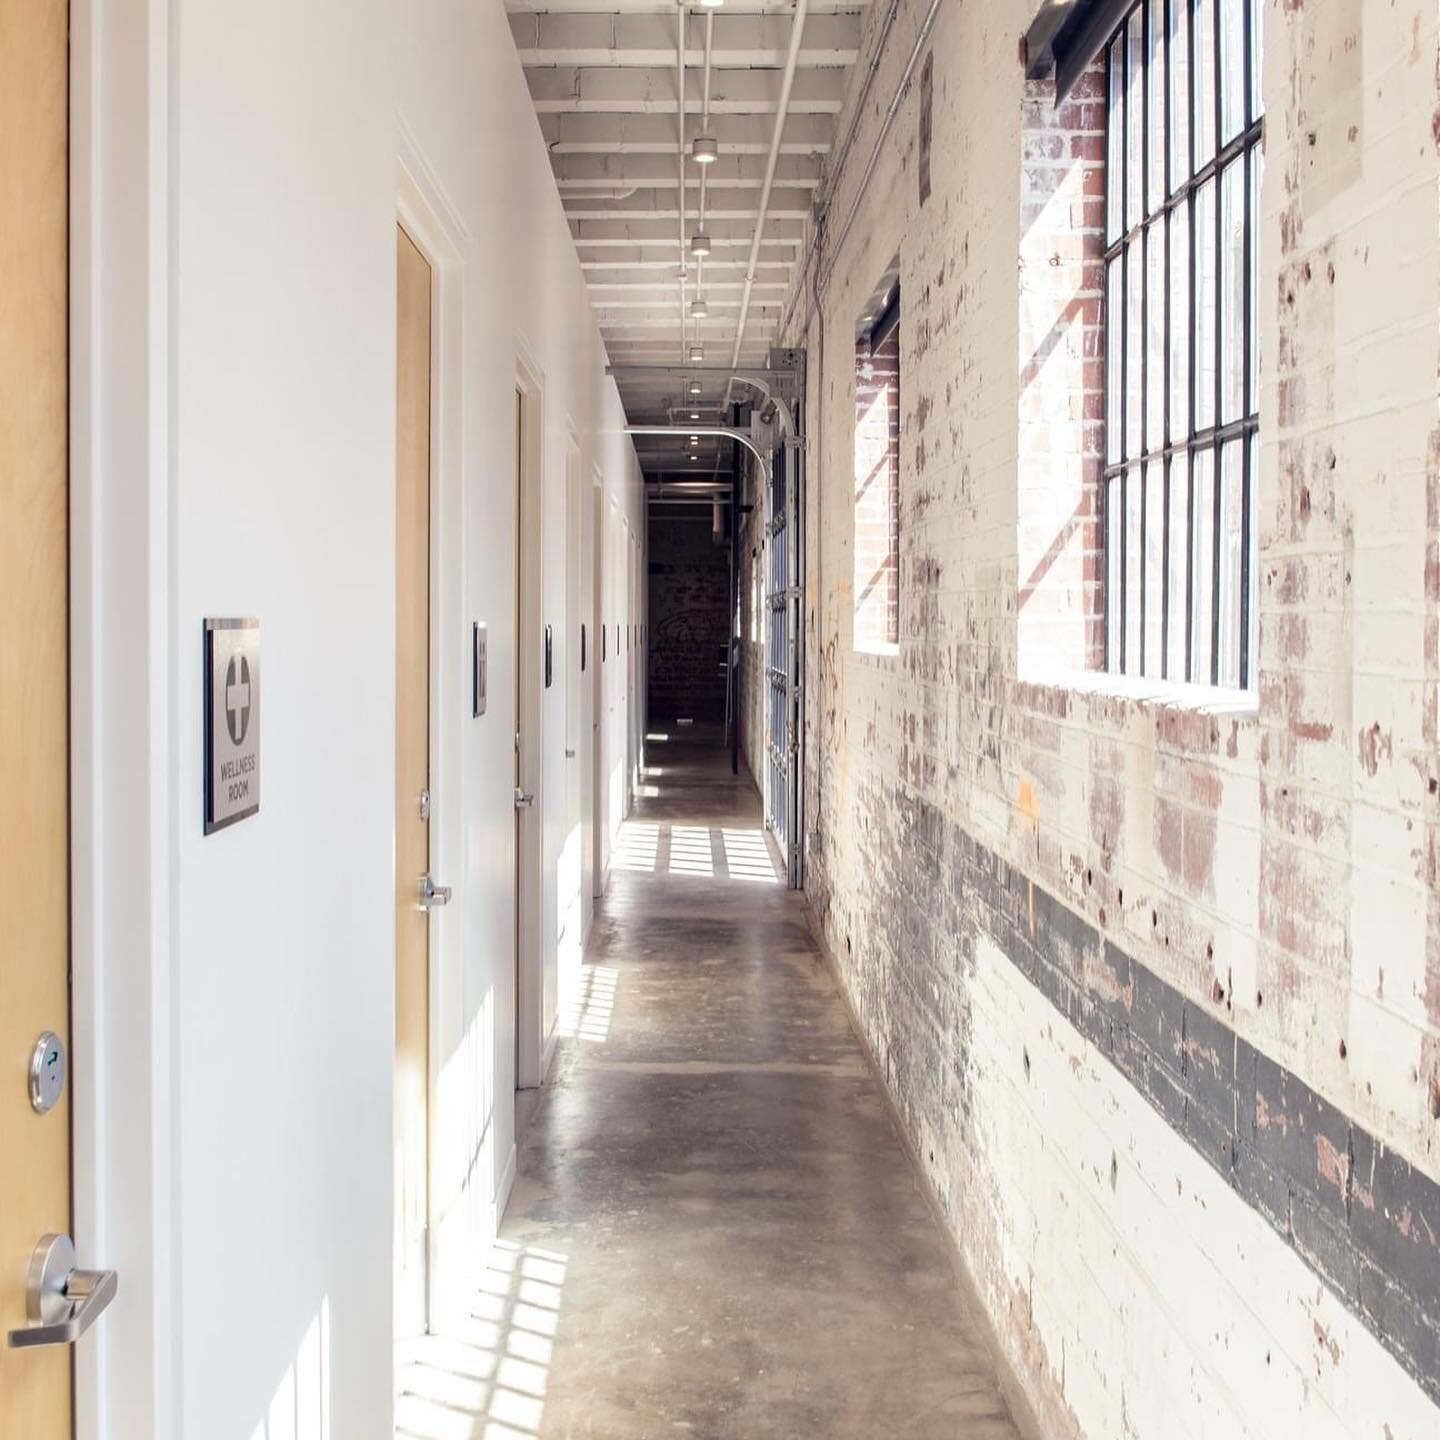 Providing transition between buildings and spaces, from work/office zones to energized communal gathering areas, while maintaining a cohesive connective thread throughout four existing historic buildings, was vital in creating a new office space that